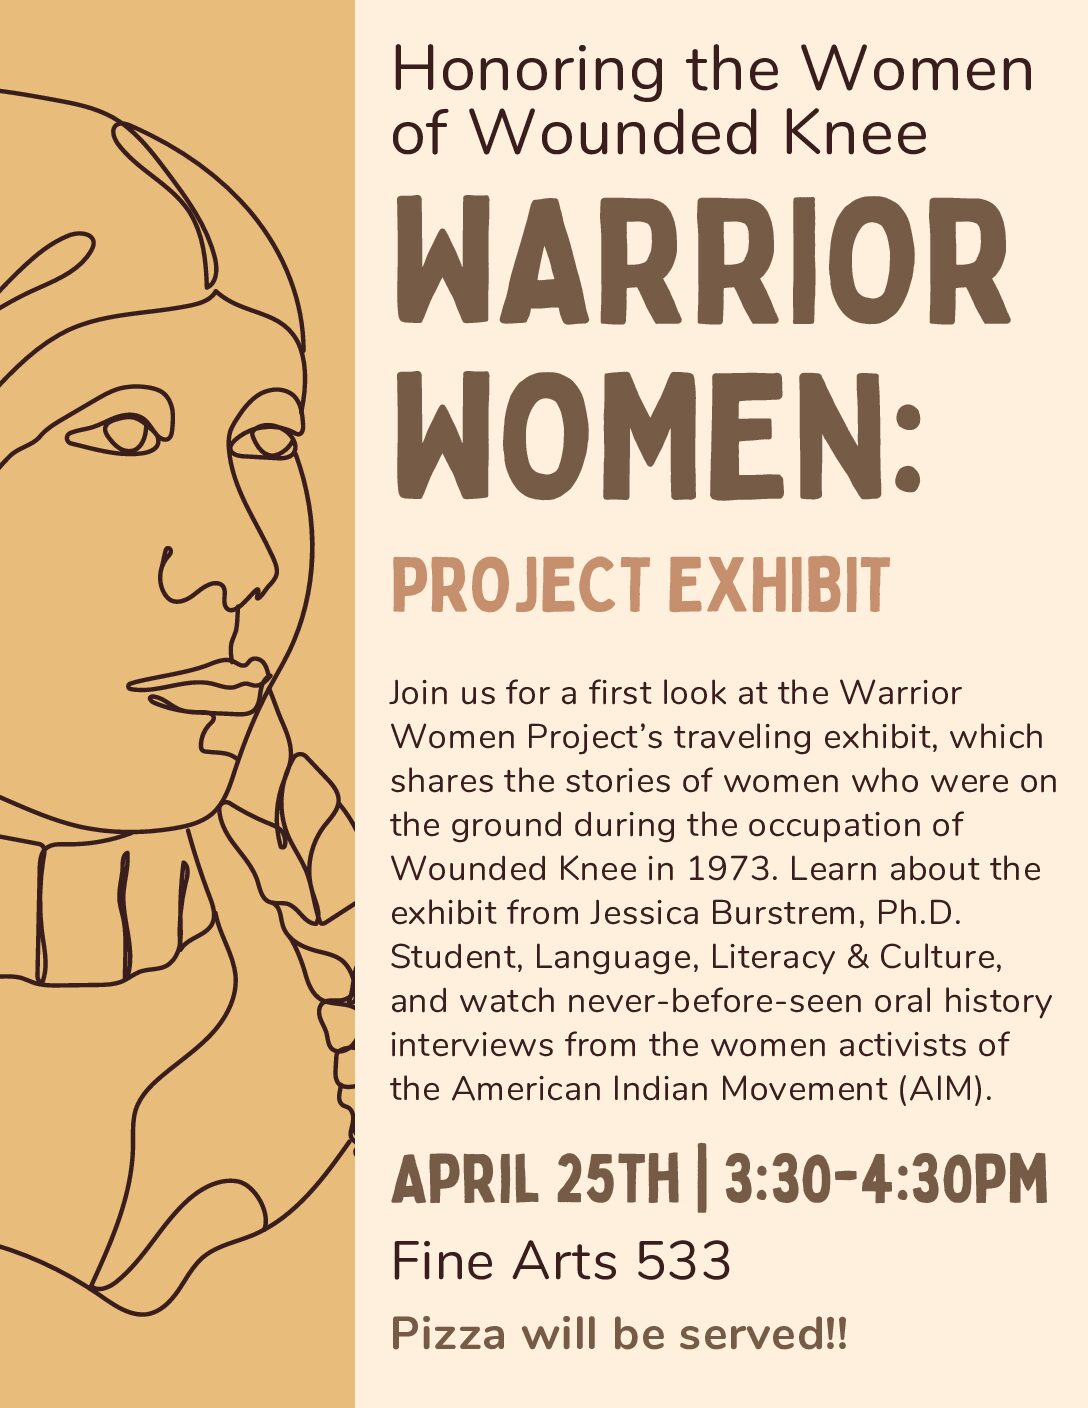 Honoring Women of Wounded Knee